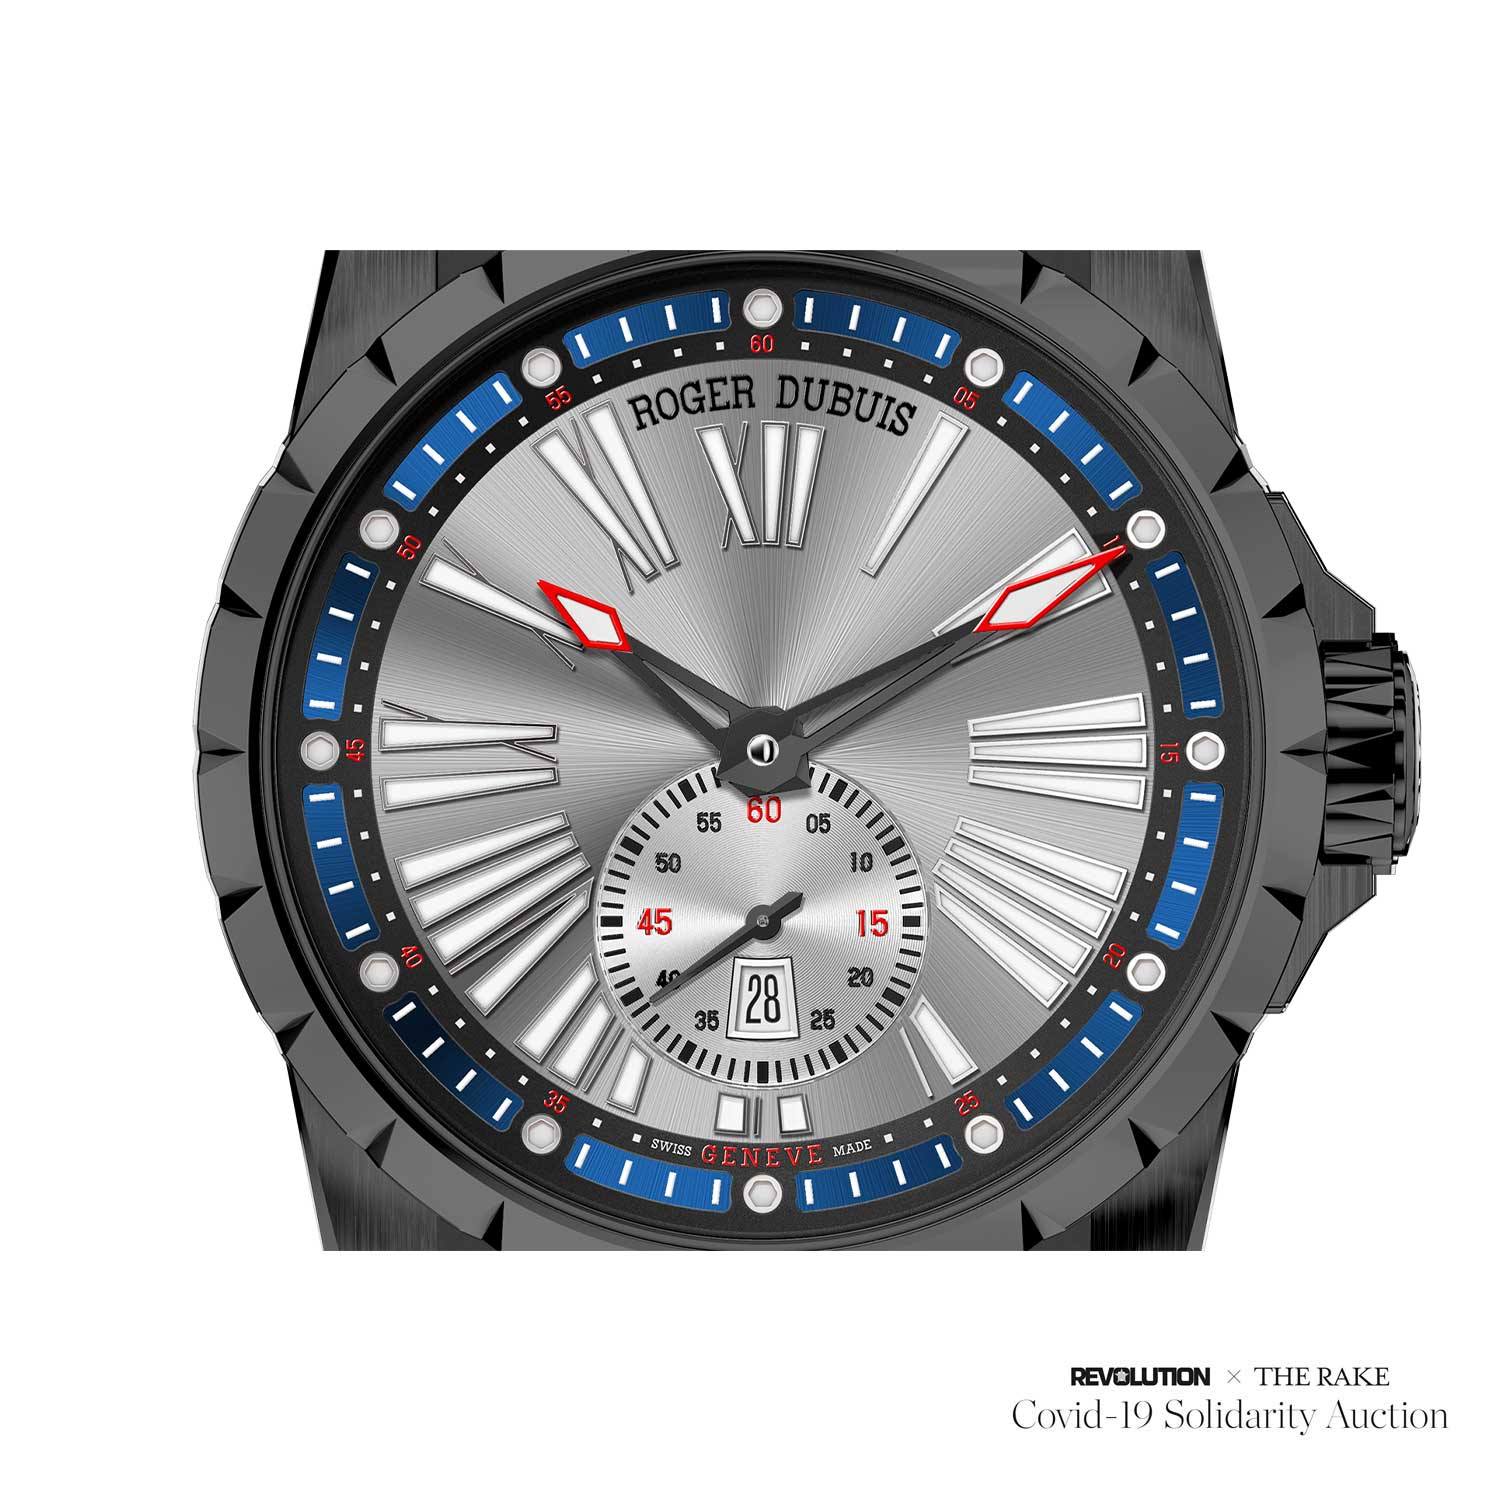 Roger Dubuis Excalibur Essential Blue, pièce unique created for Revolution x The Rake Covid-19 Solidarity Auction